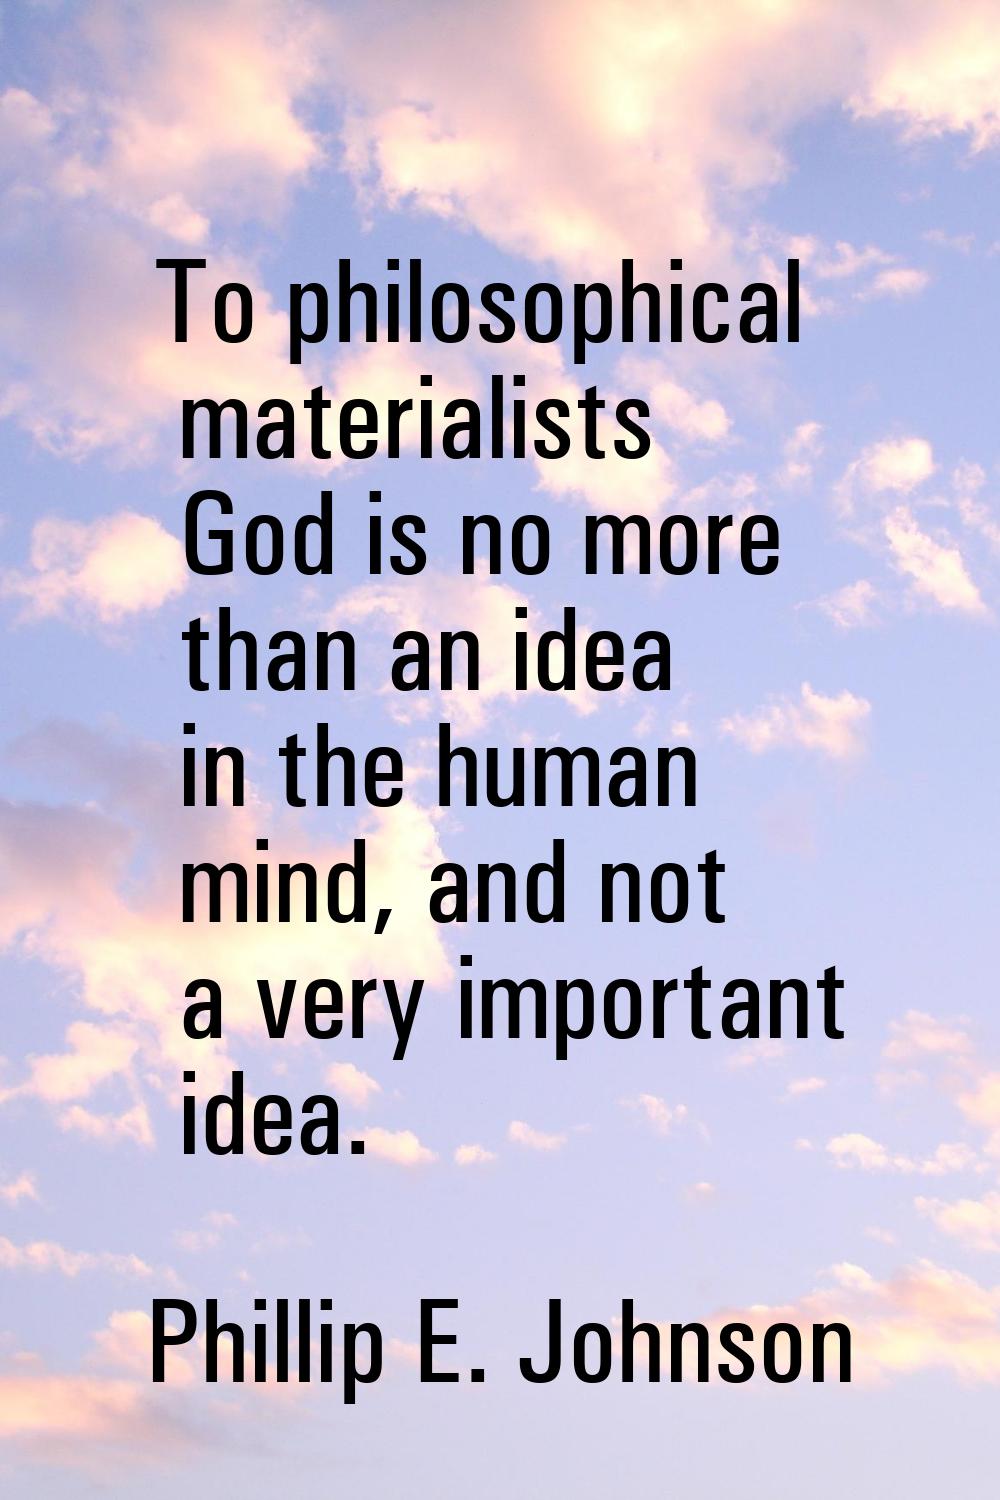 To philosophical materialists God is no more than an idea in the human mind, and not a very importa